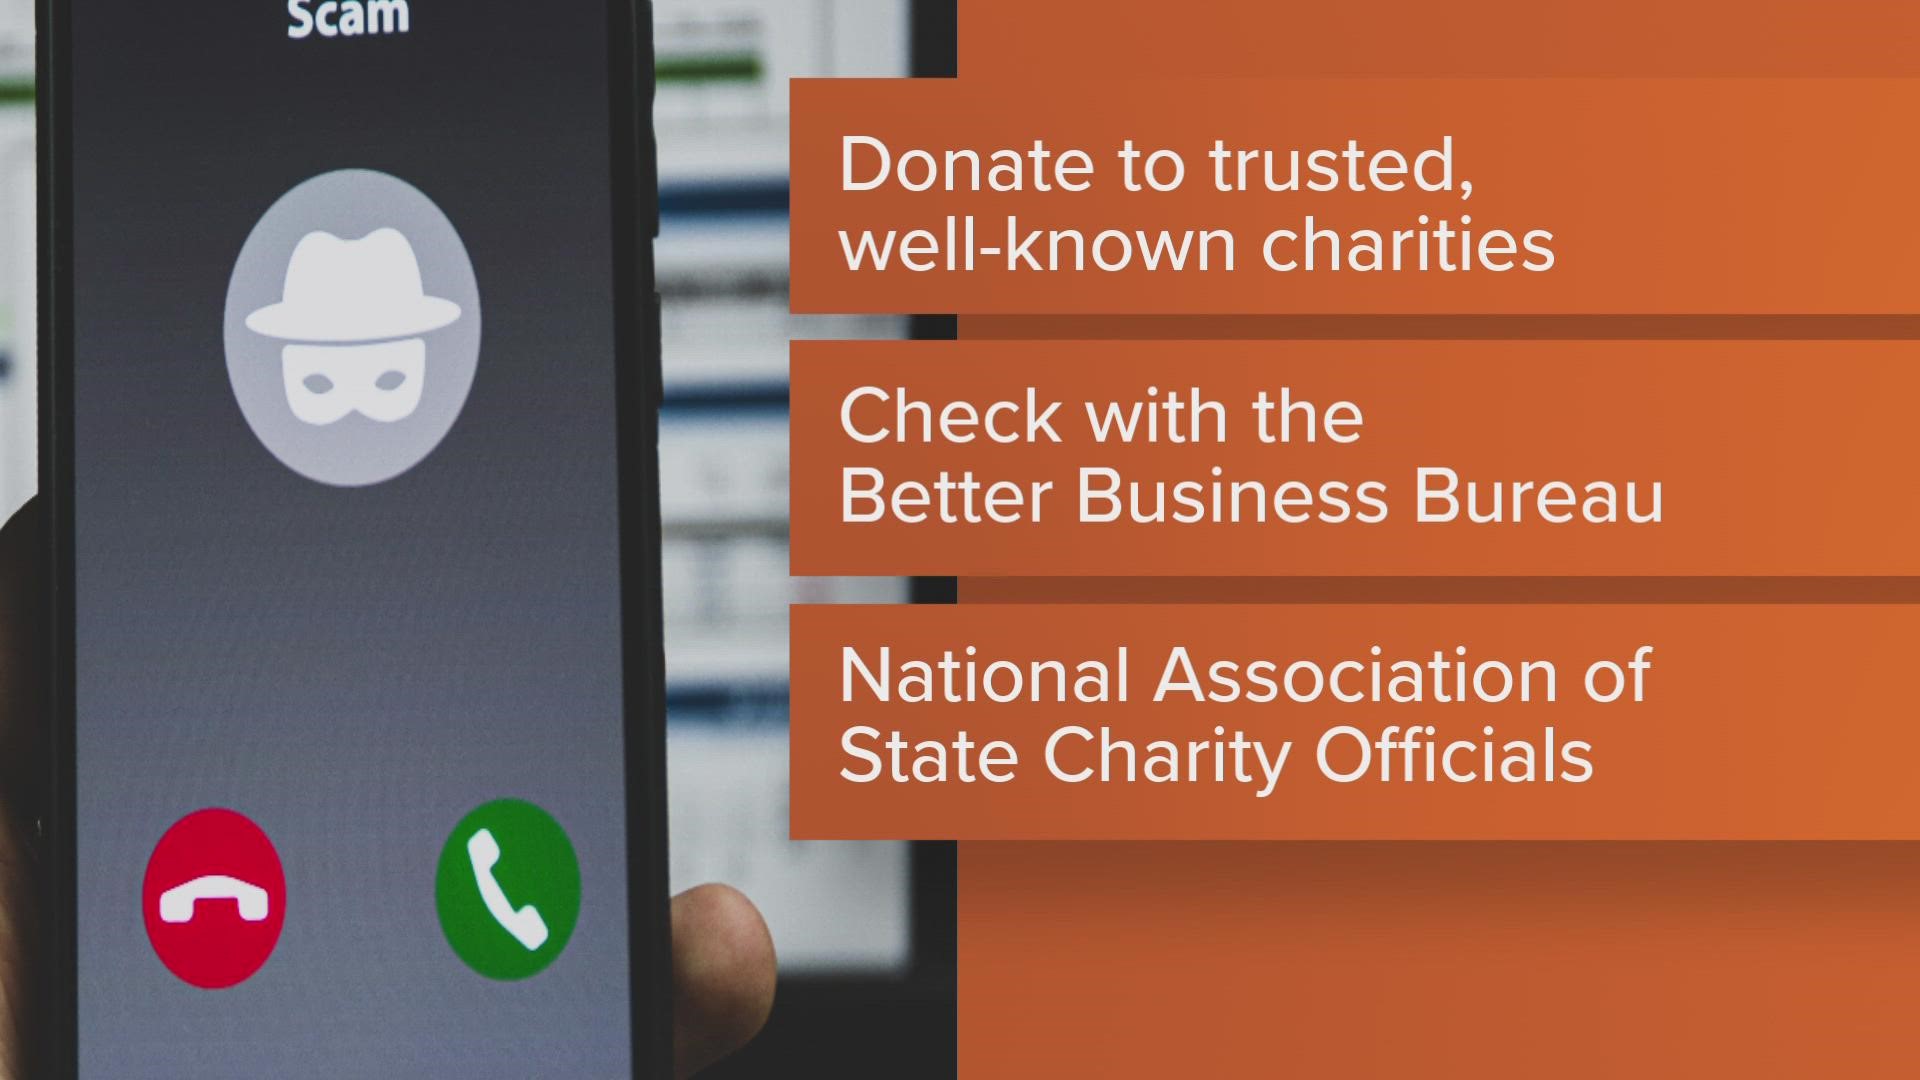 With Hurricane Ian hitting Florida this week, it is important to make sure you take the steps to avoid scams when donating to charities.